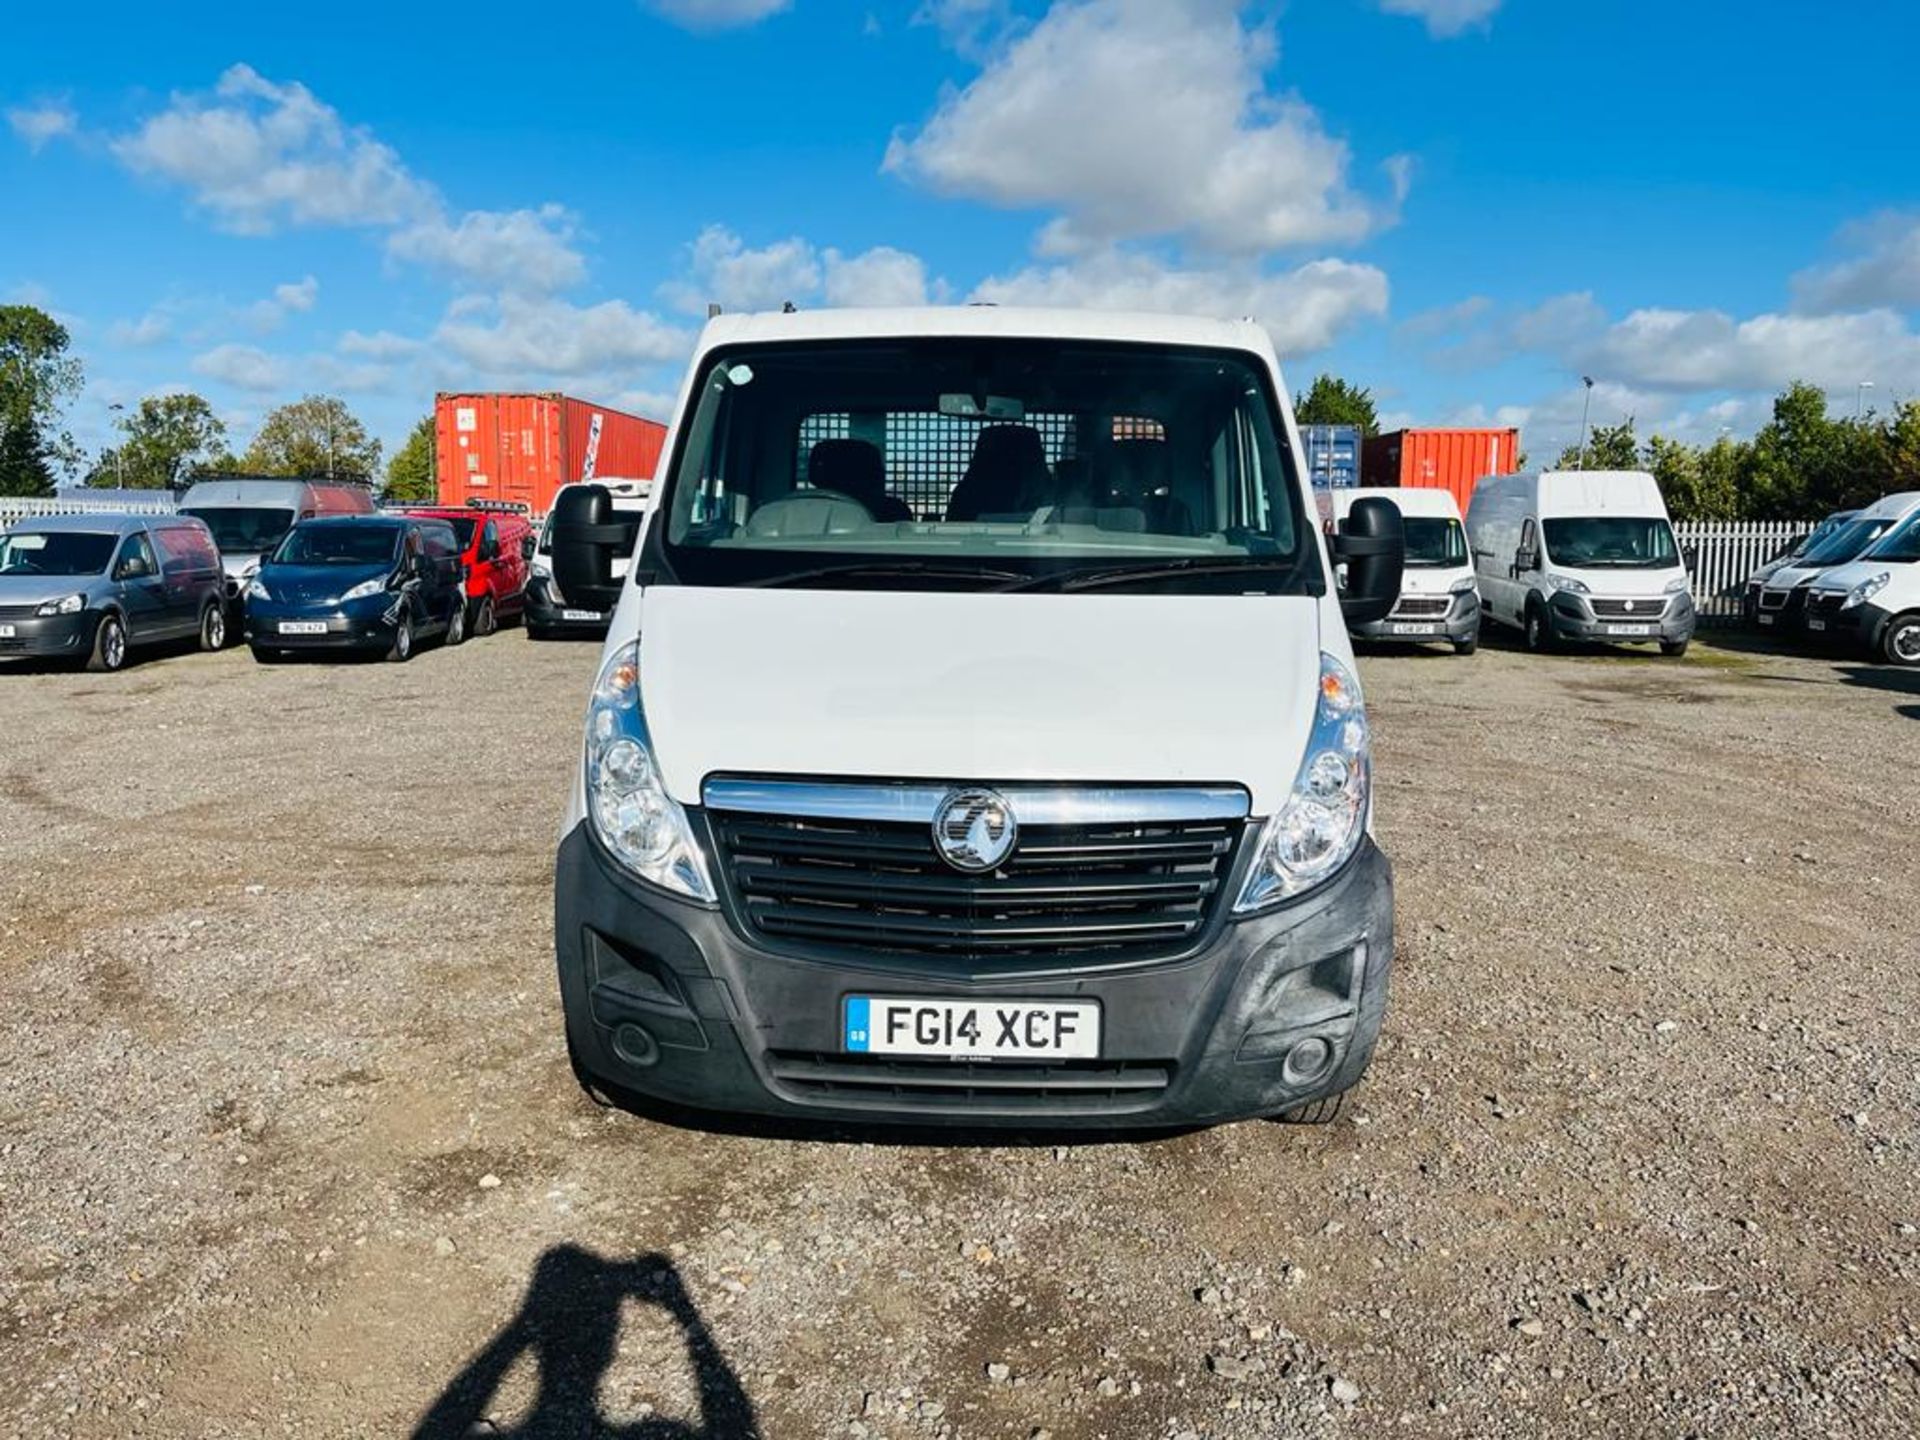 Vauxhall Movano R3500 2.3 CDTI 125 TRW RWD Tipper 2014 '14 Reg' Only 94,206 Miles - Image 3 of 30